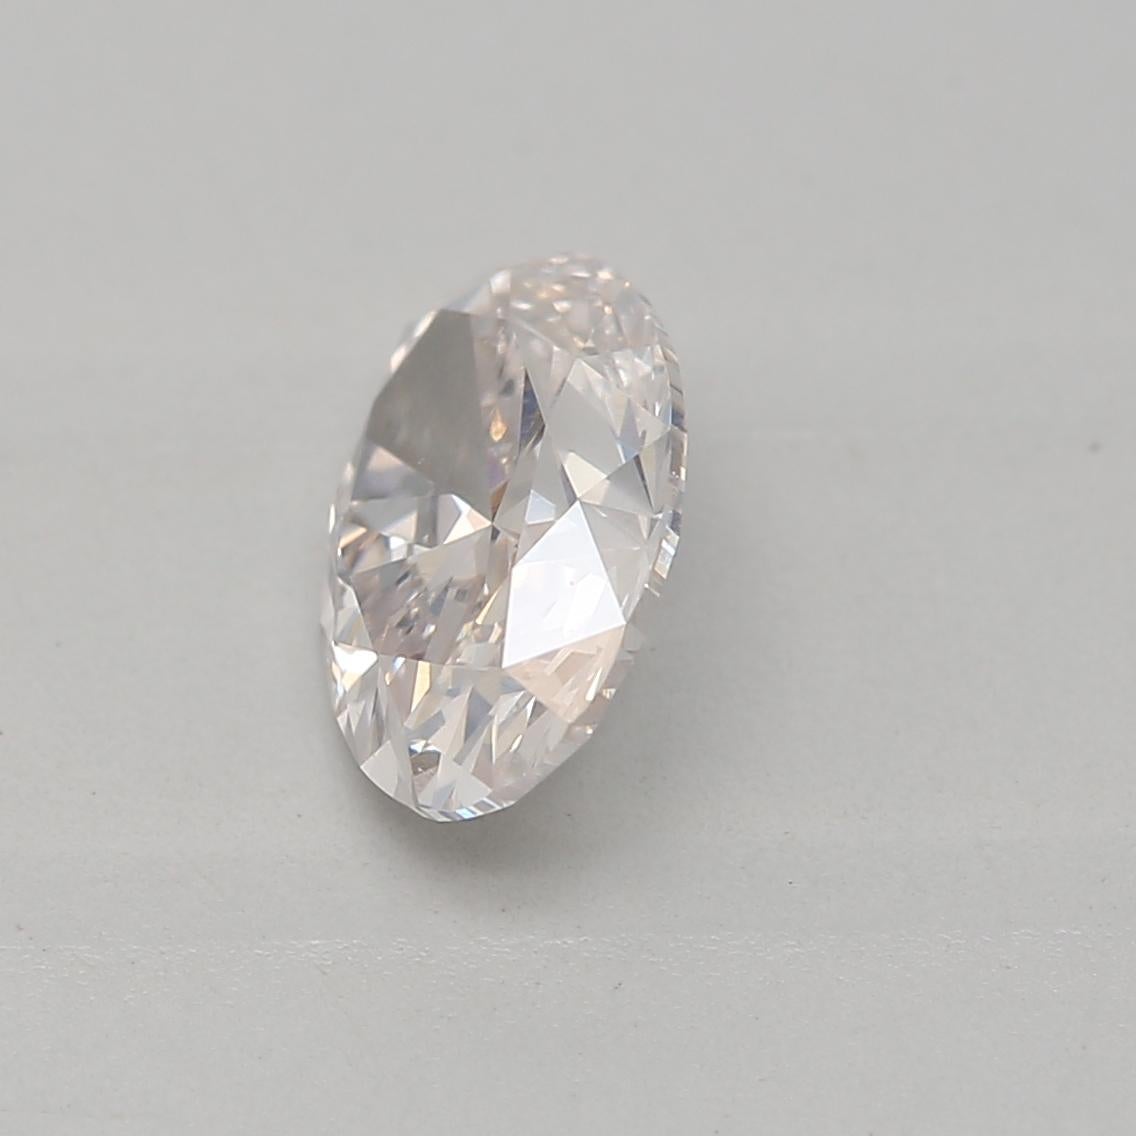 Women's or Men's 0.70 Carat Very Light Pink Oval Cut Diamond SI1 Clarity GIA Certified For Sale